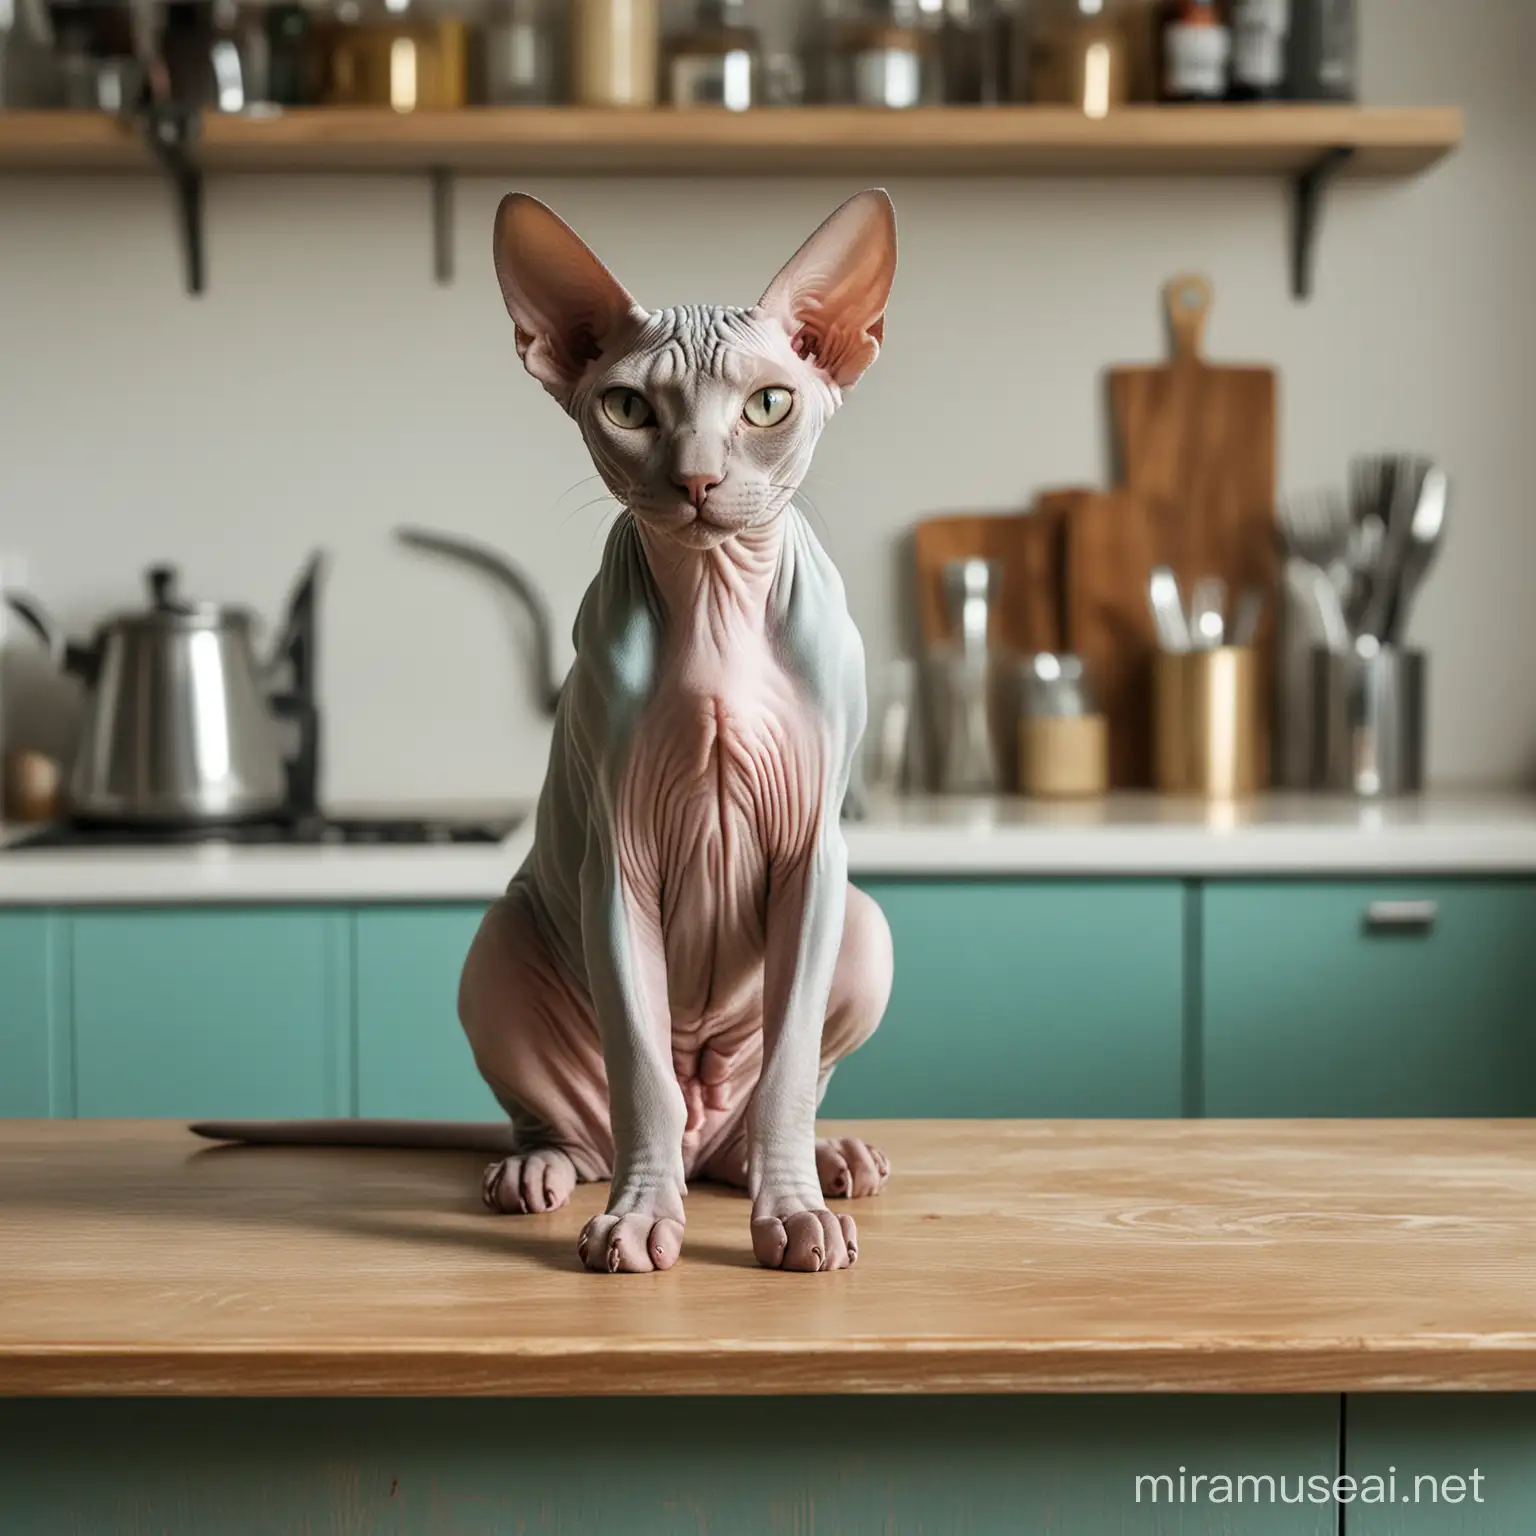 Sphynx Cat Relaxing on Turquoise Kitchen Counter